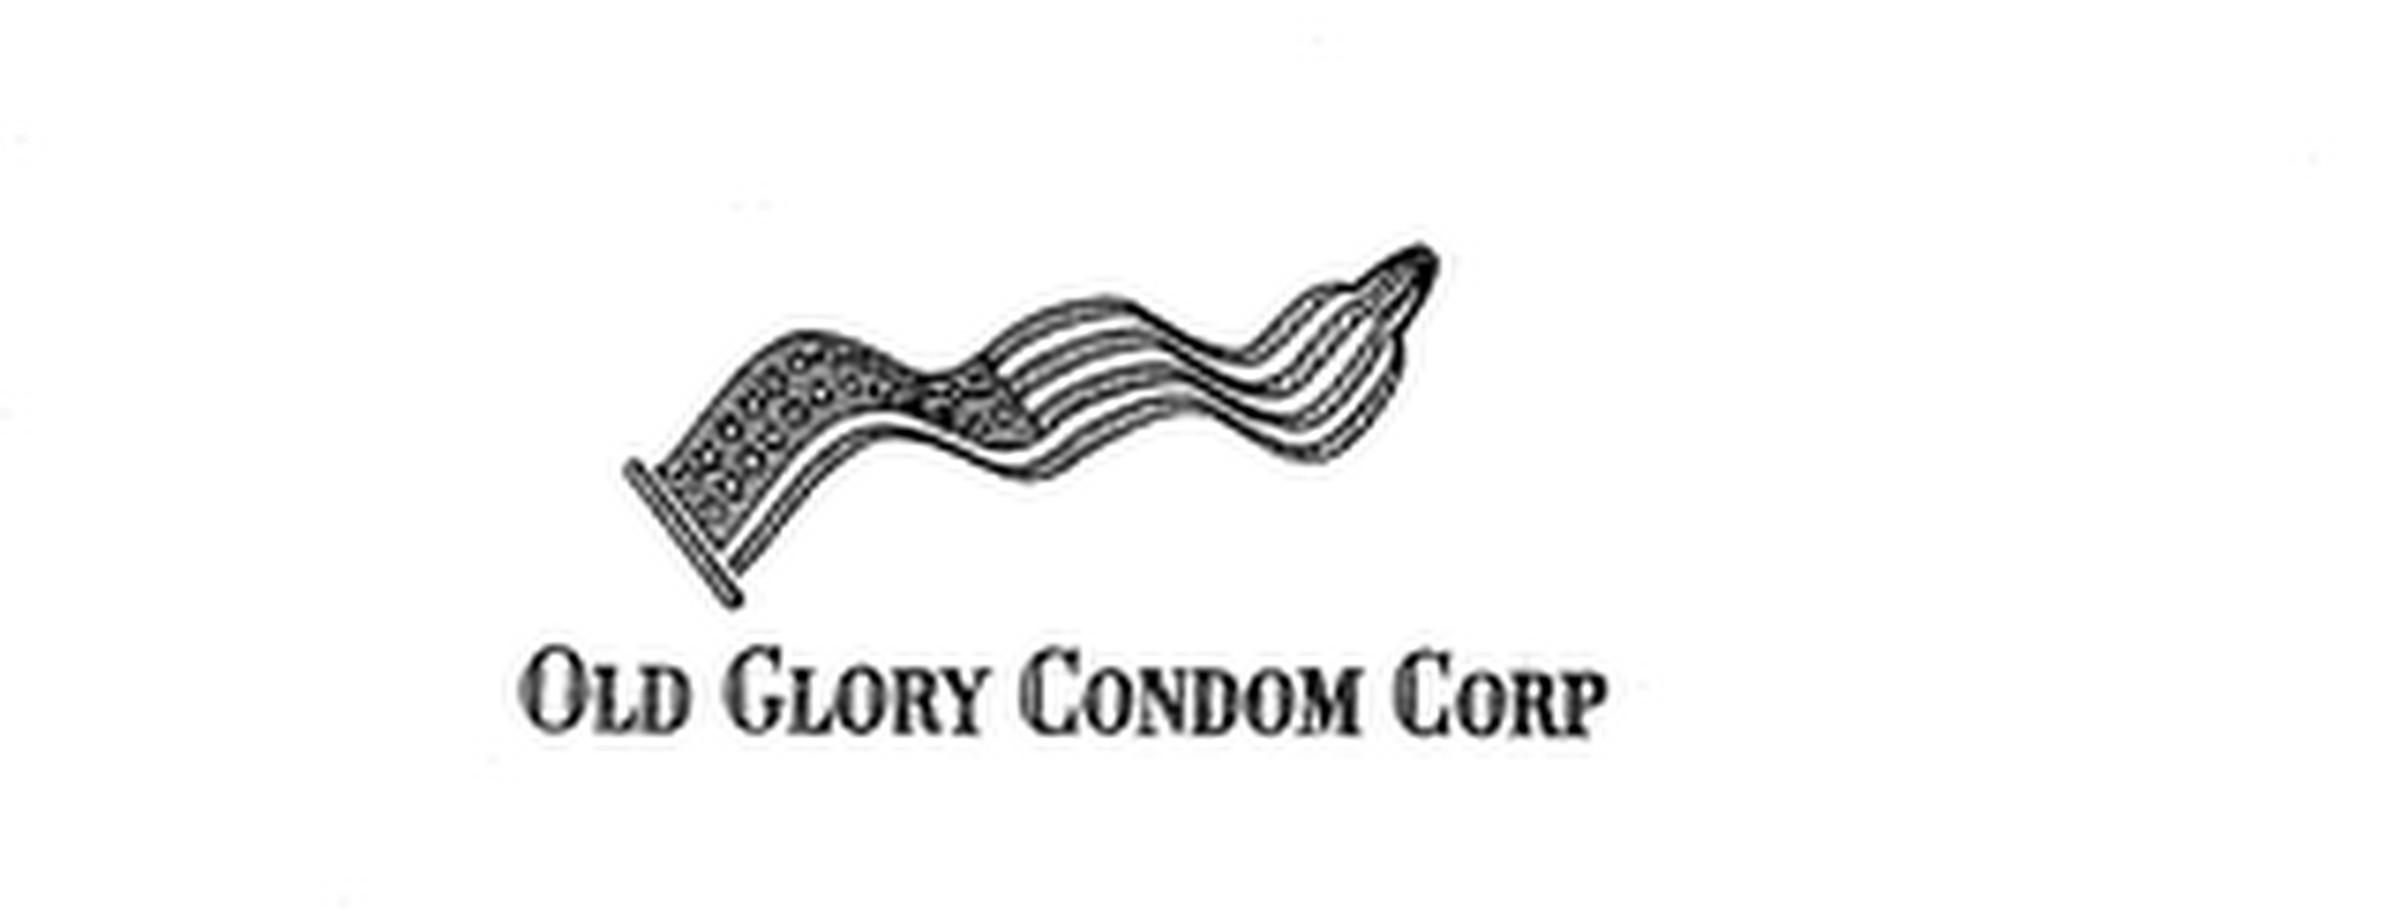 The trademark at issue in Old Glory Condom Corp.